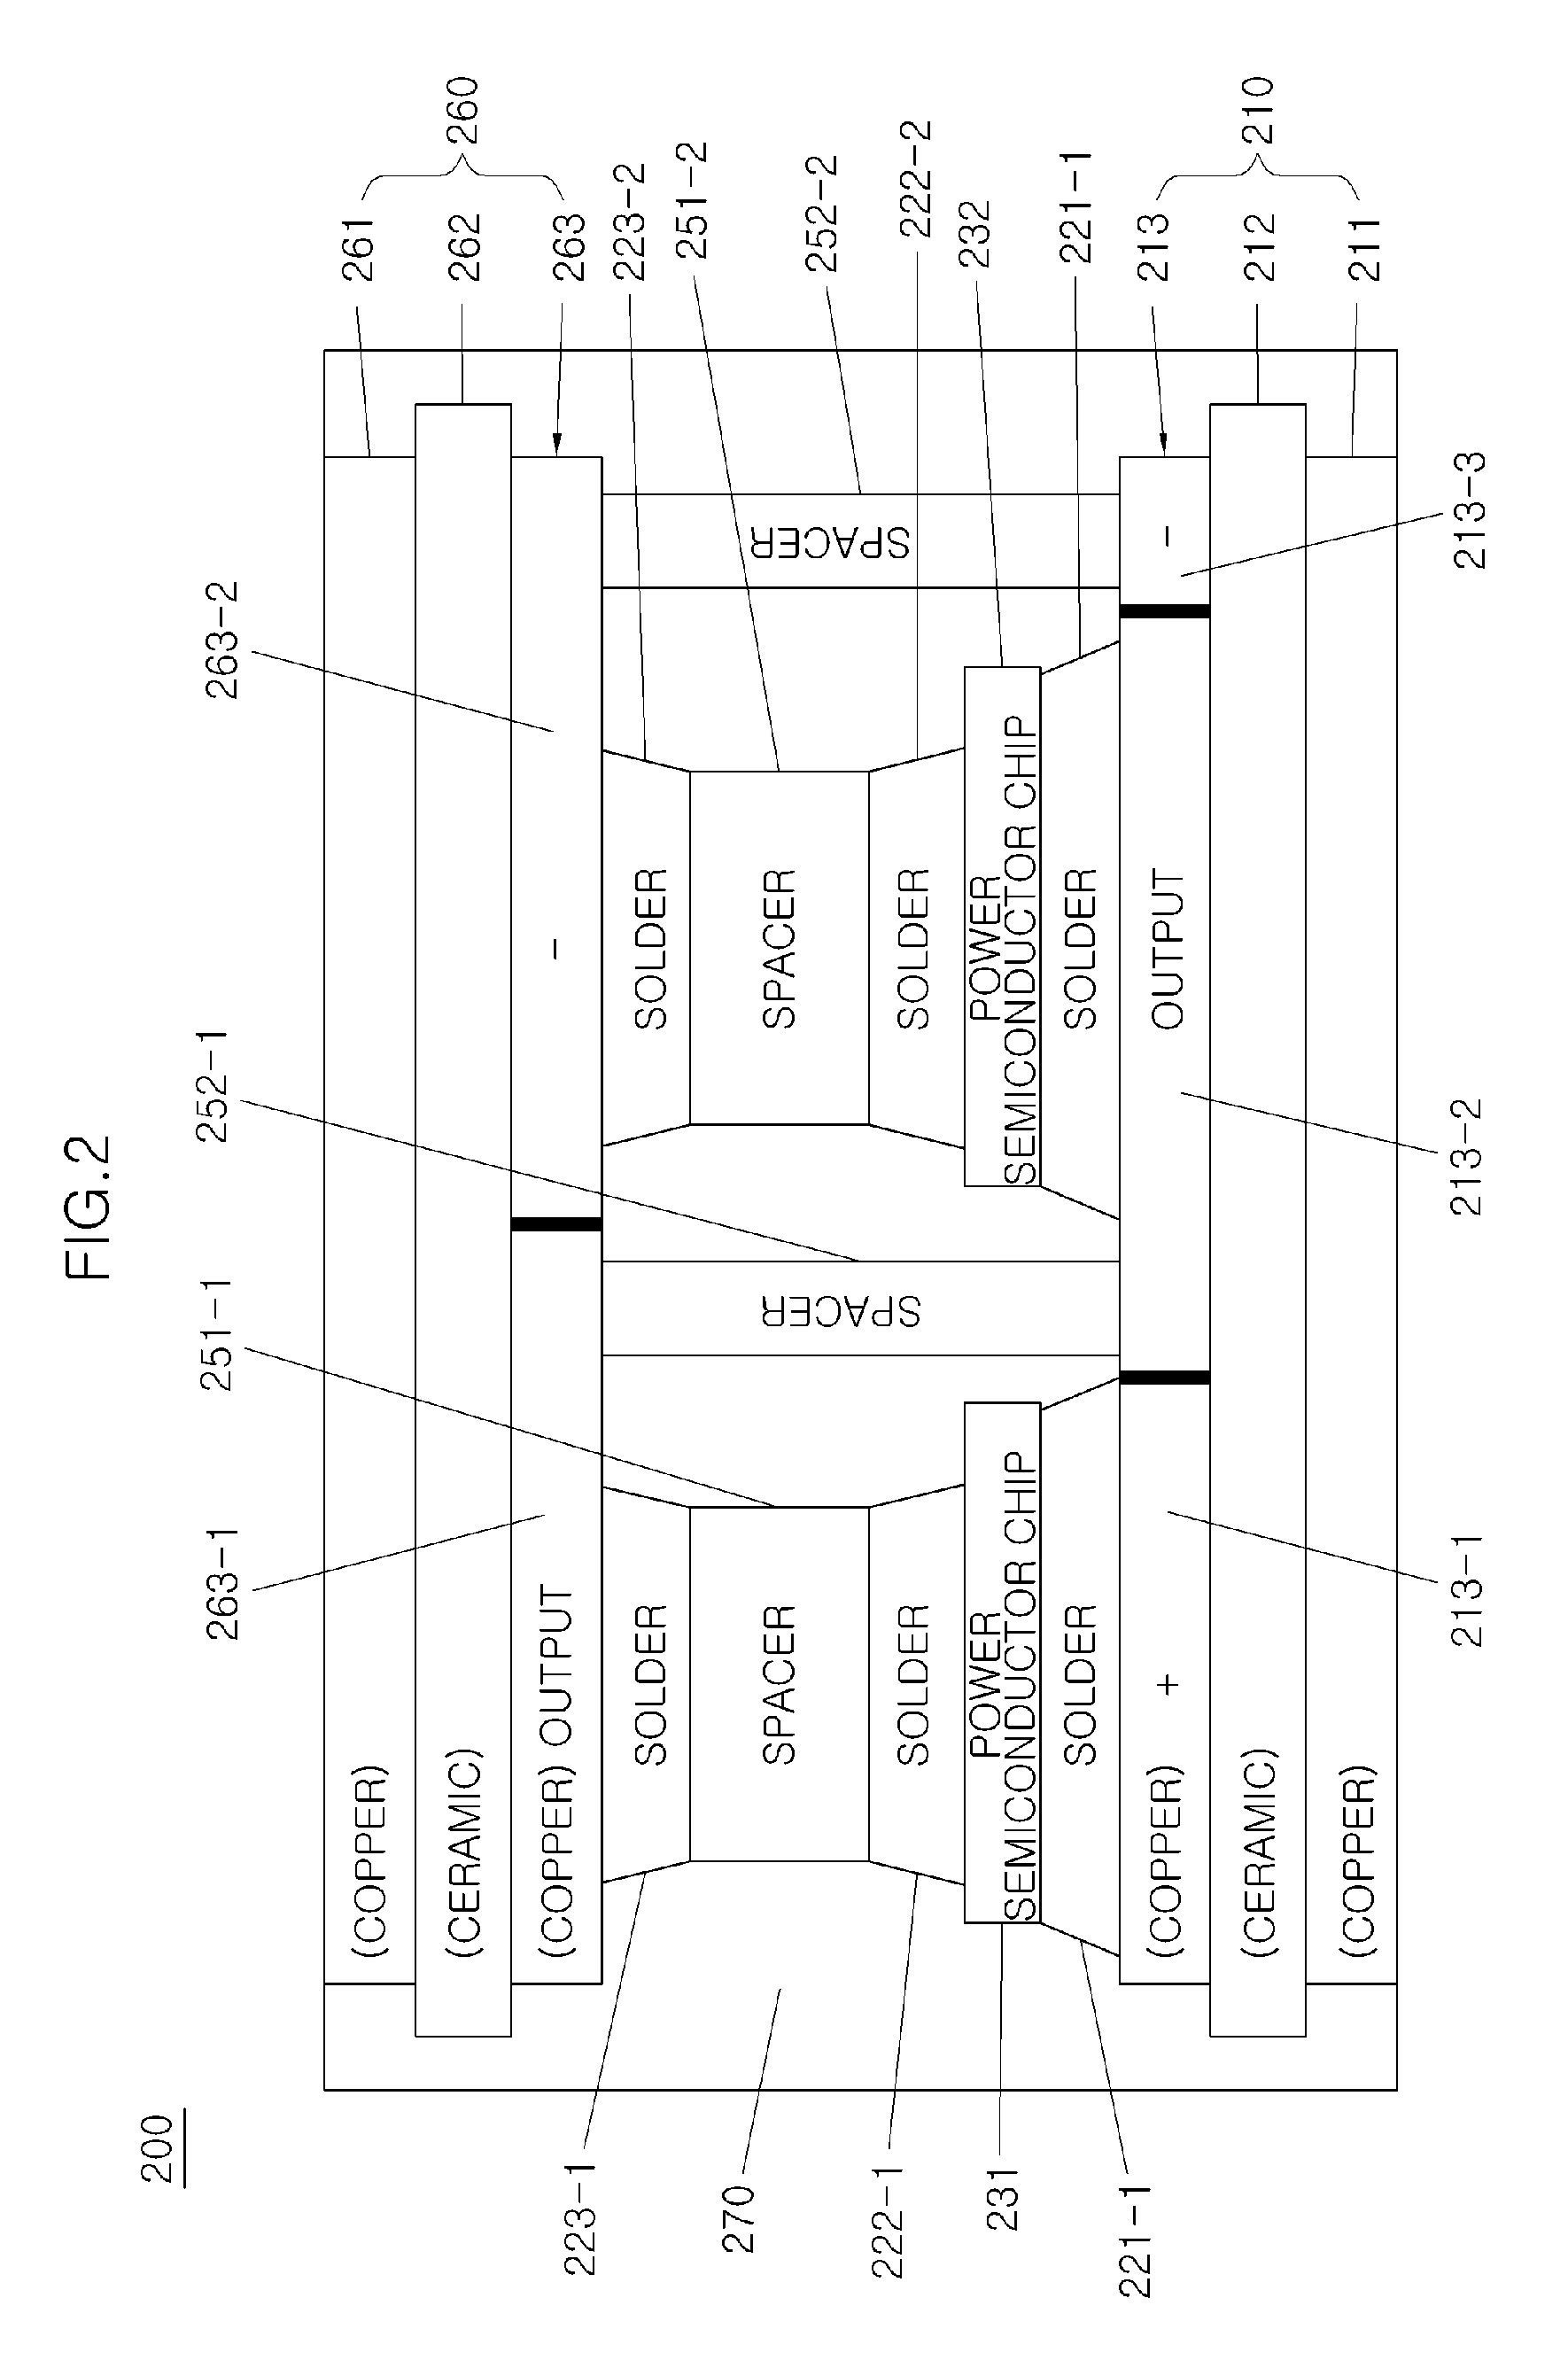 Double-sided cooling power module and method for manufacturing the same